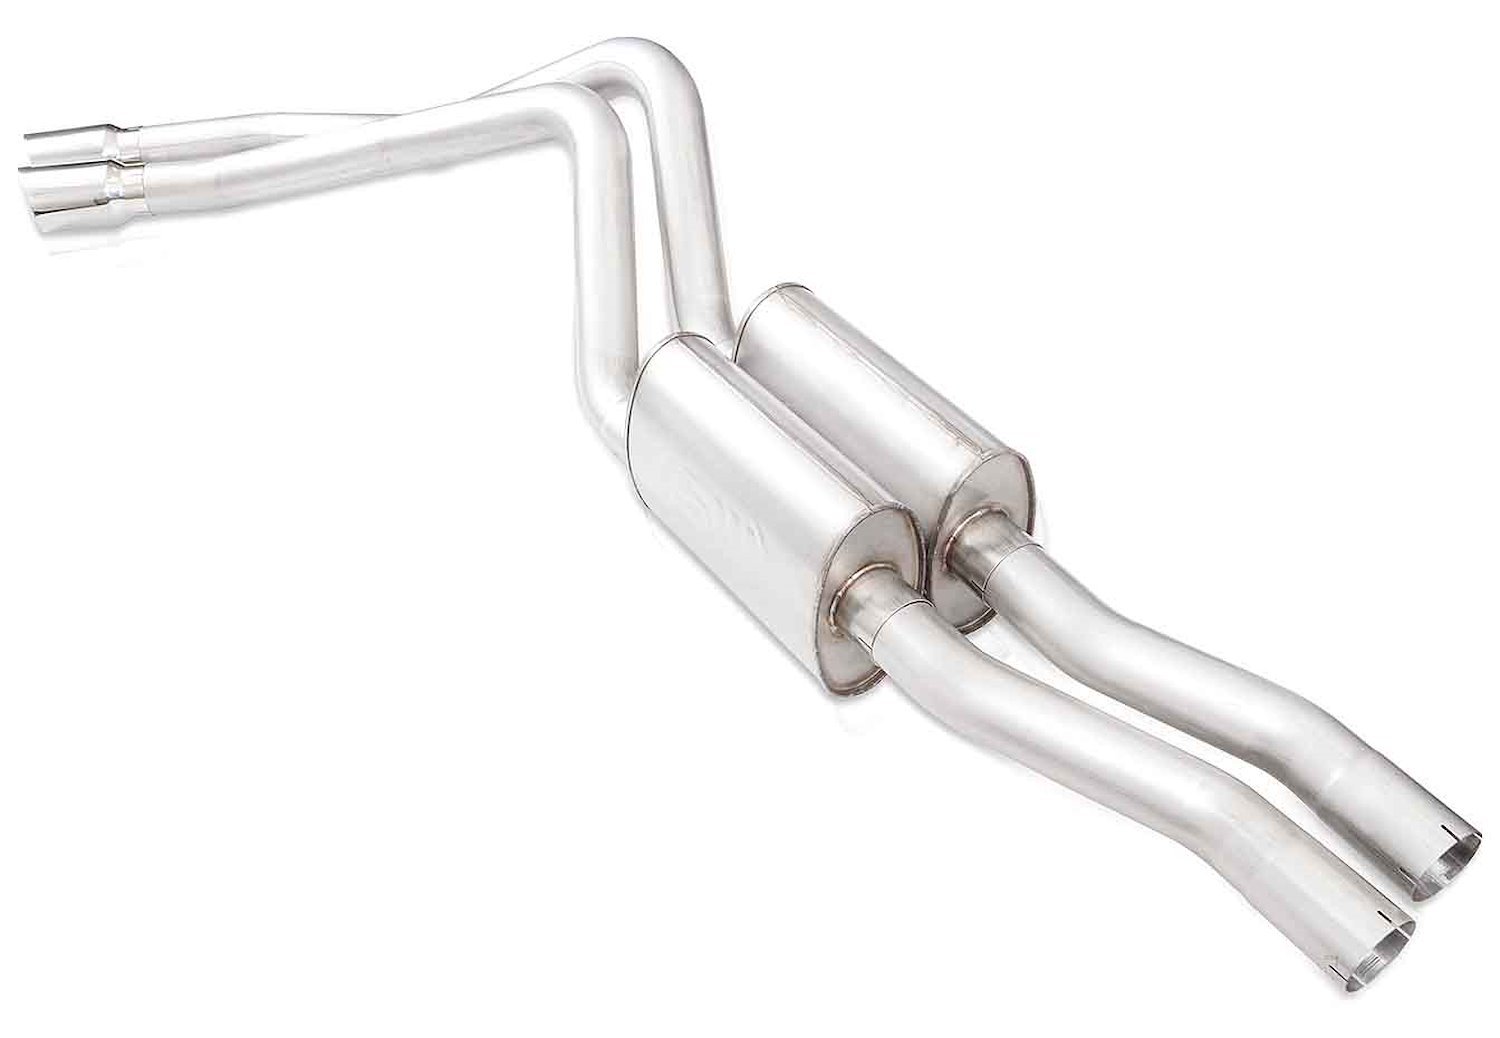 Redline Series Cat-Back Exhaust System 2015-2019 Chevy Tahoe/GMC Yukon 5.3L, 6.2L - Polished Tips - Aggressive Sound